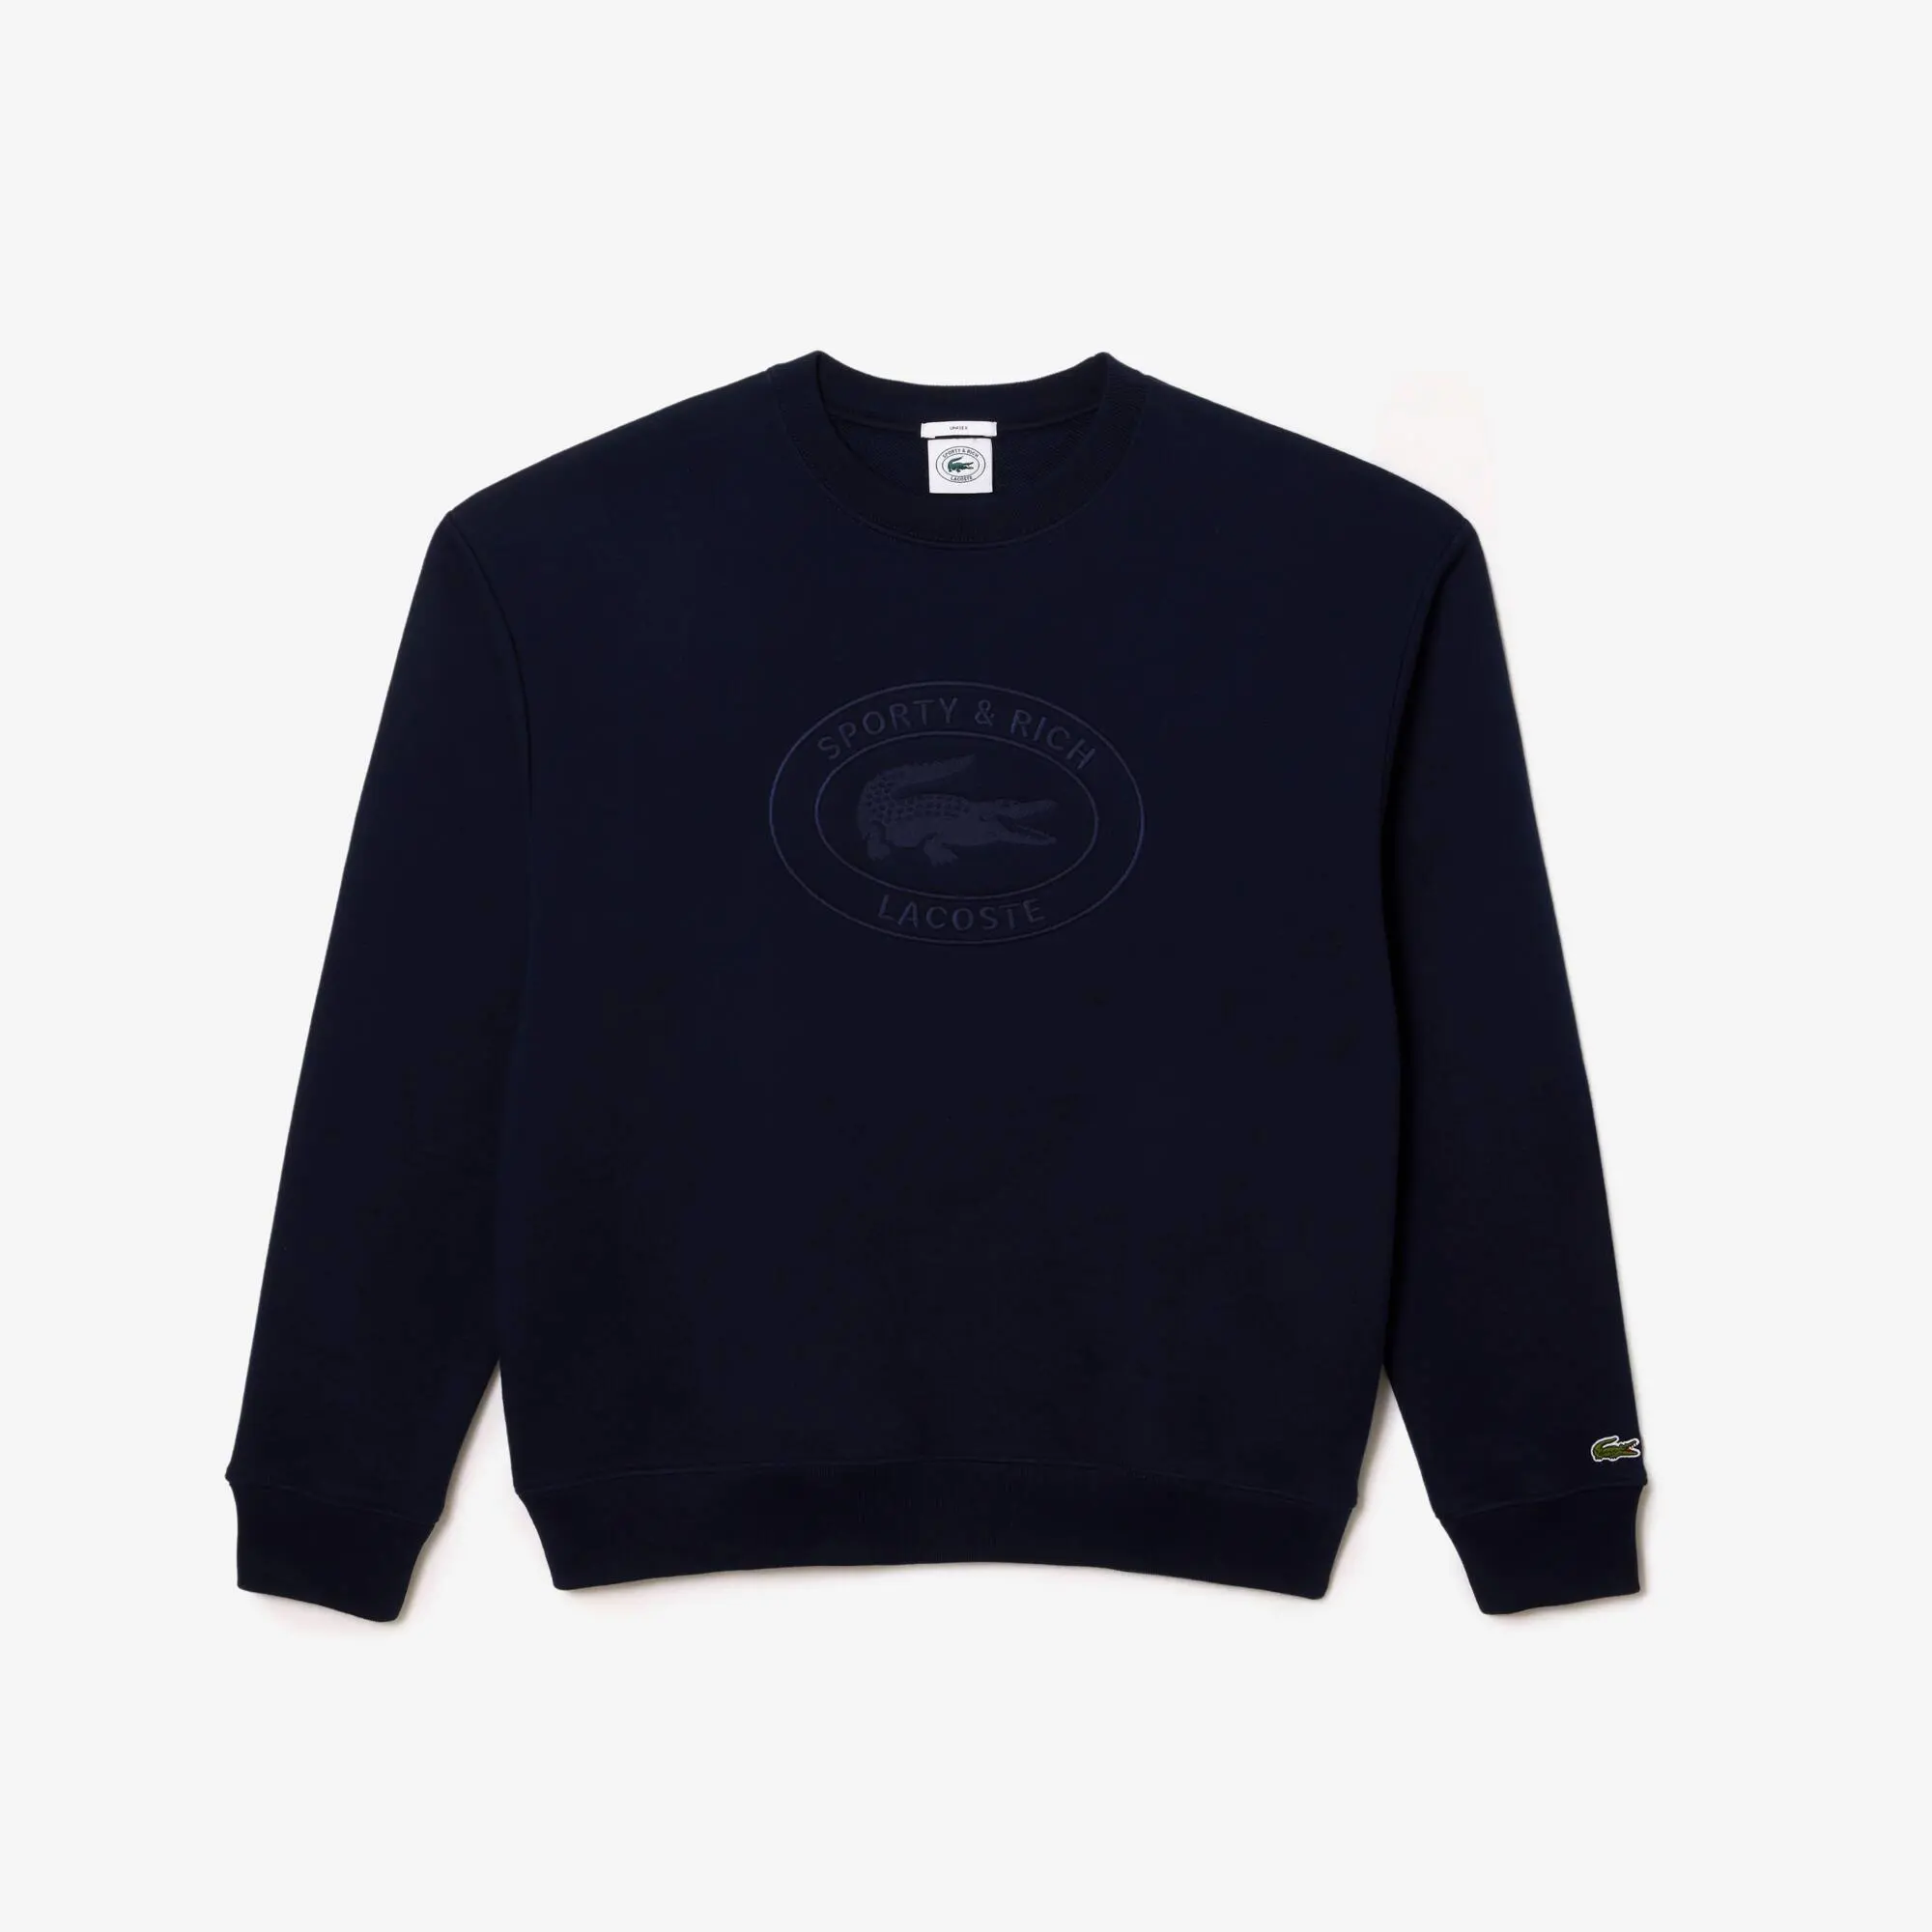 Lacoste x Sporty & Rich Embroidered Sweatshirt. 2